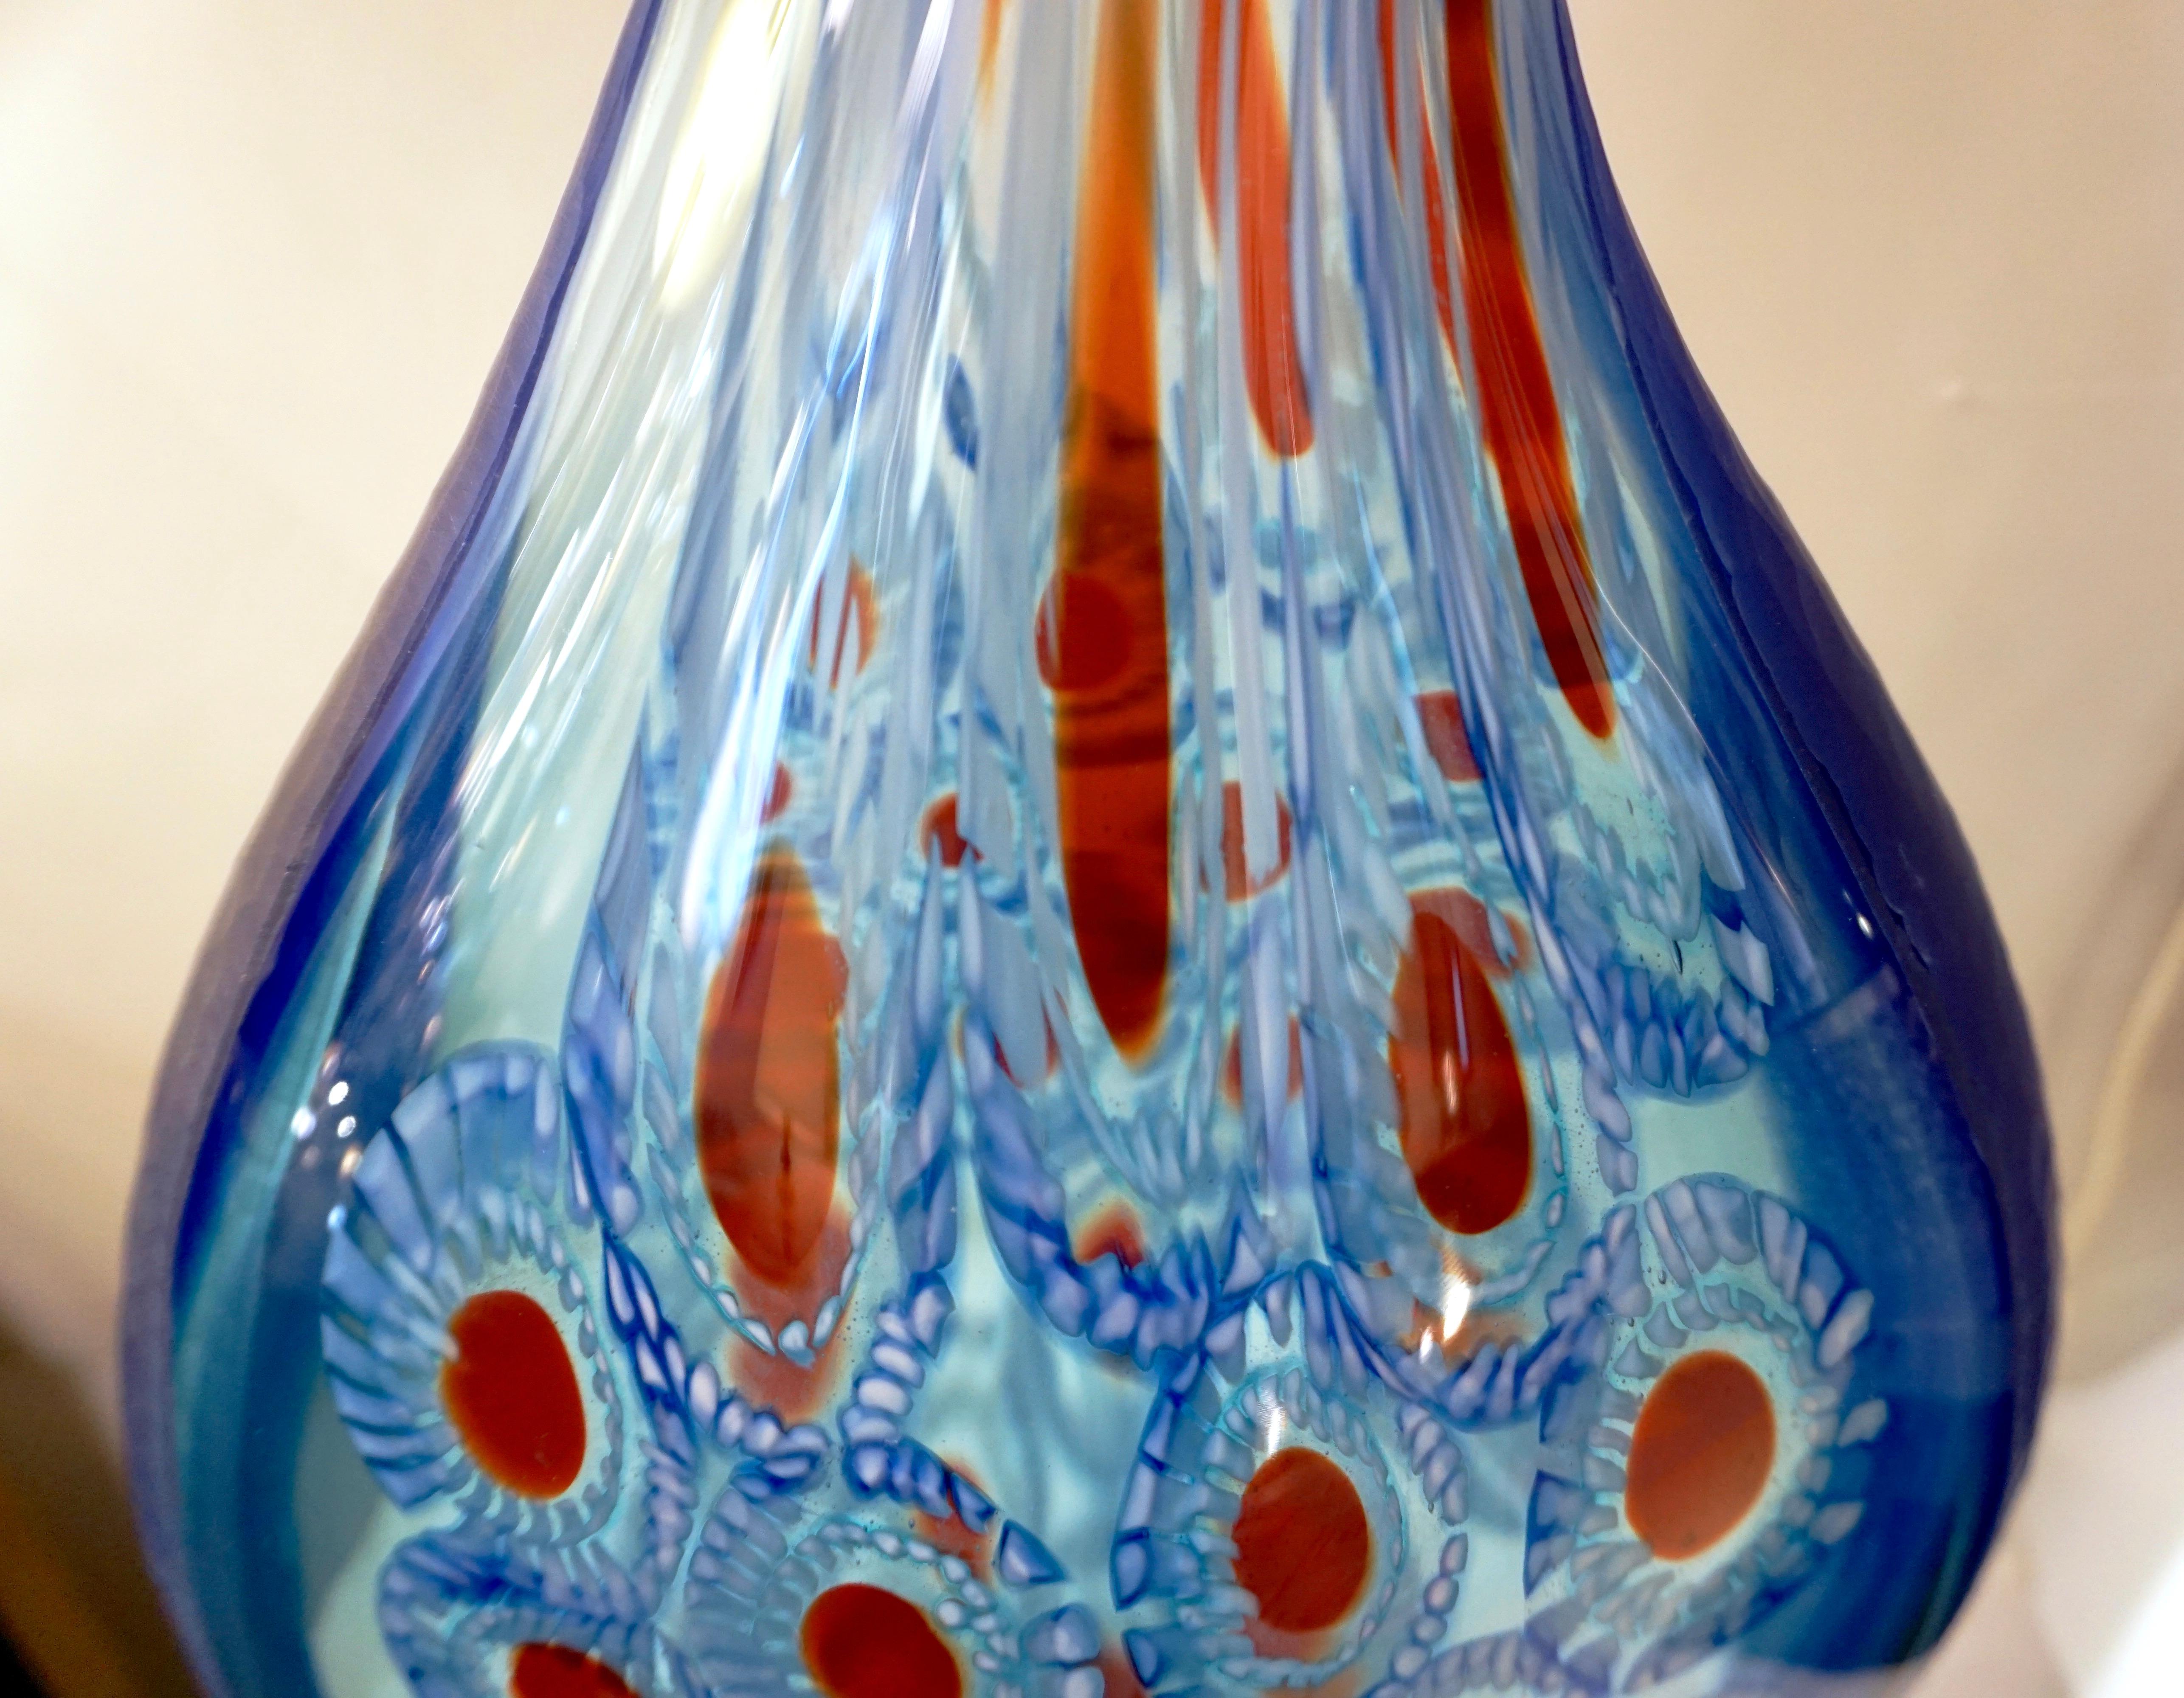 Engraved Dona Modern Art Murano Glass Sapphire Blue Sculpture Vase with Red White Murrine For Sale